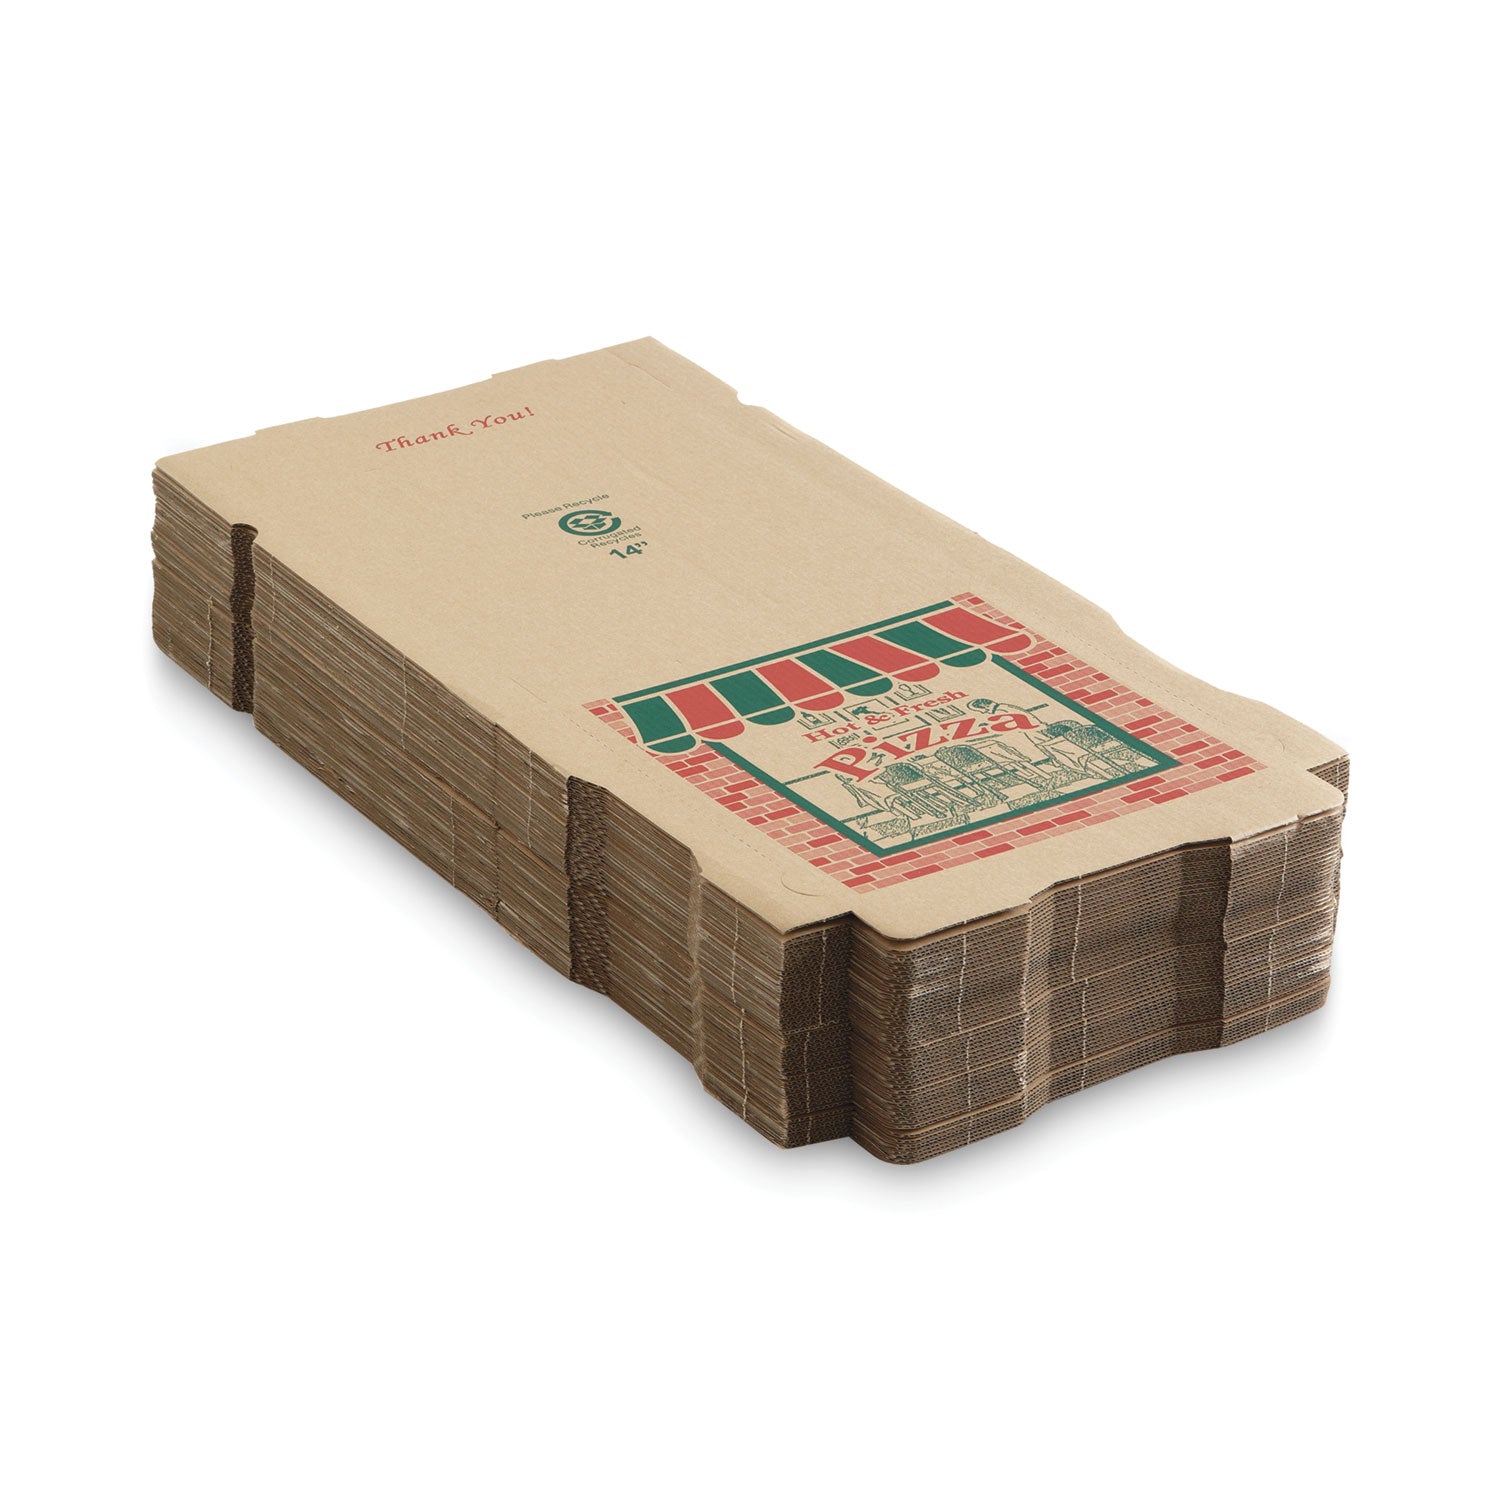 corrugated-pizza-boxes-storefront-14-x-14-x-175-brown-red-green-paper-50-carton_arv7142504 - 2